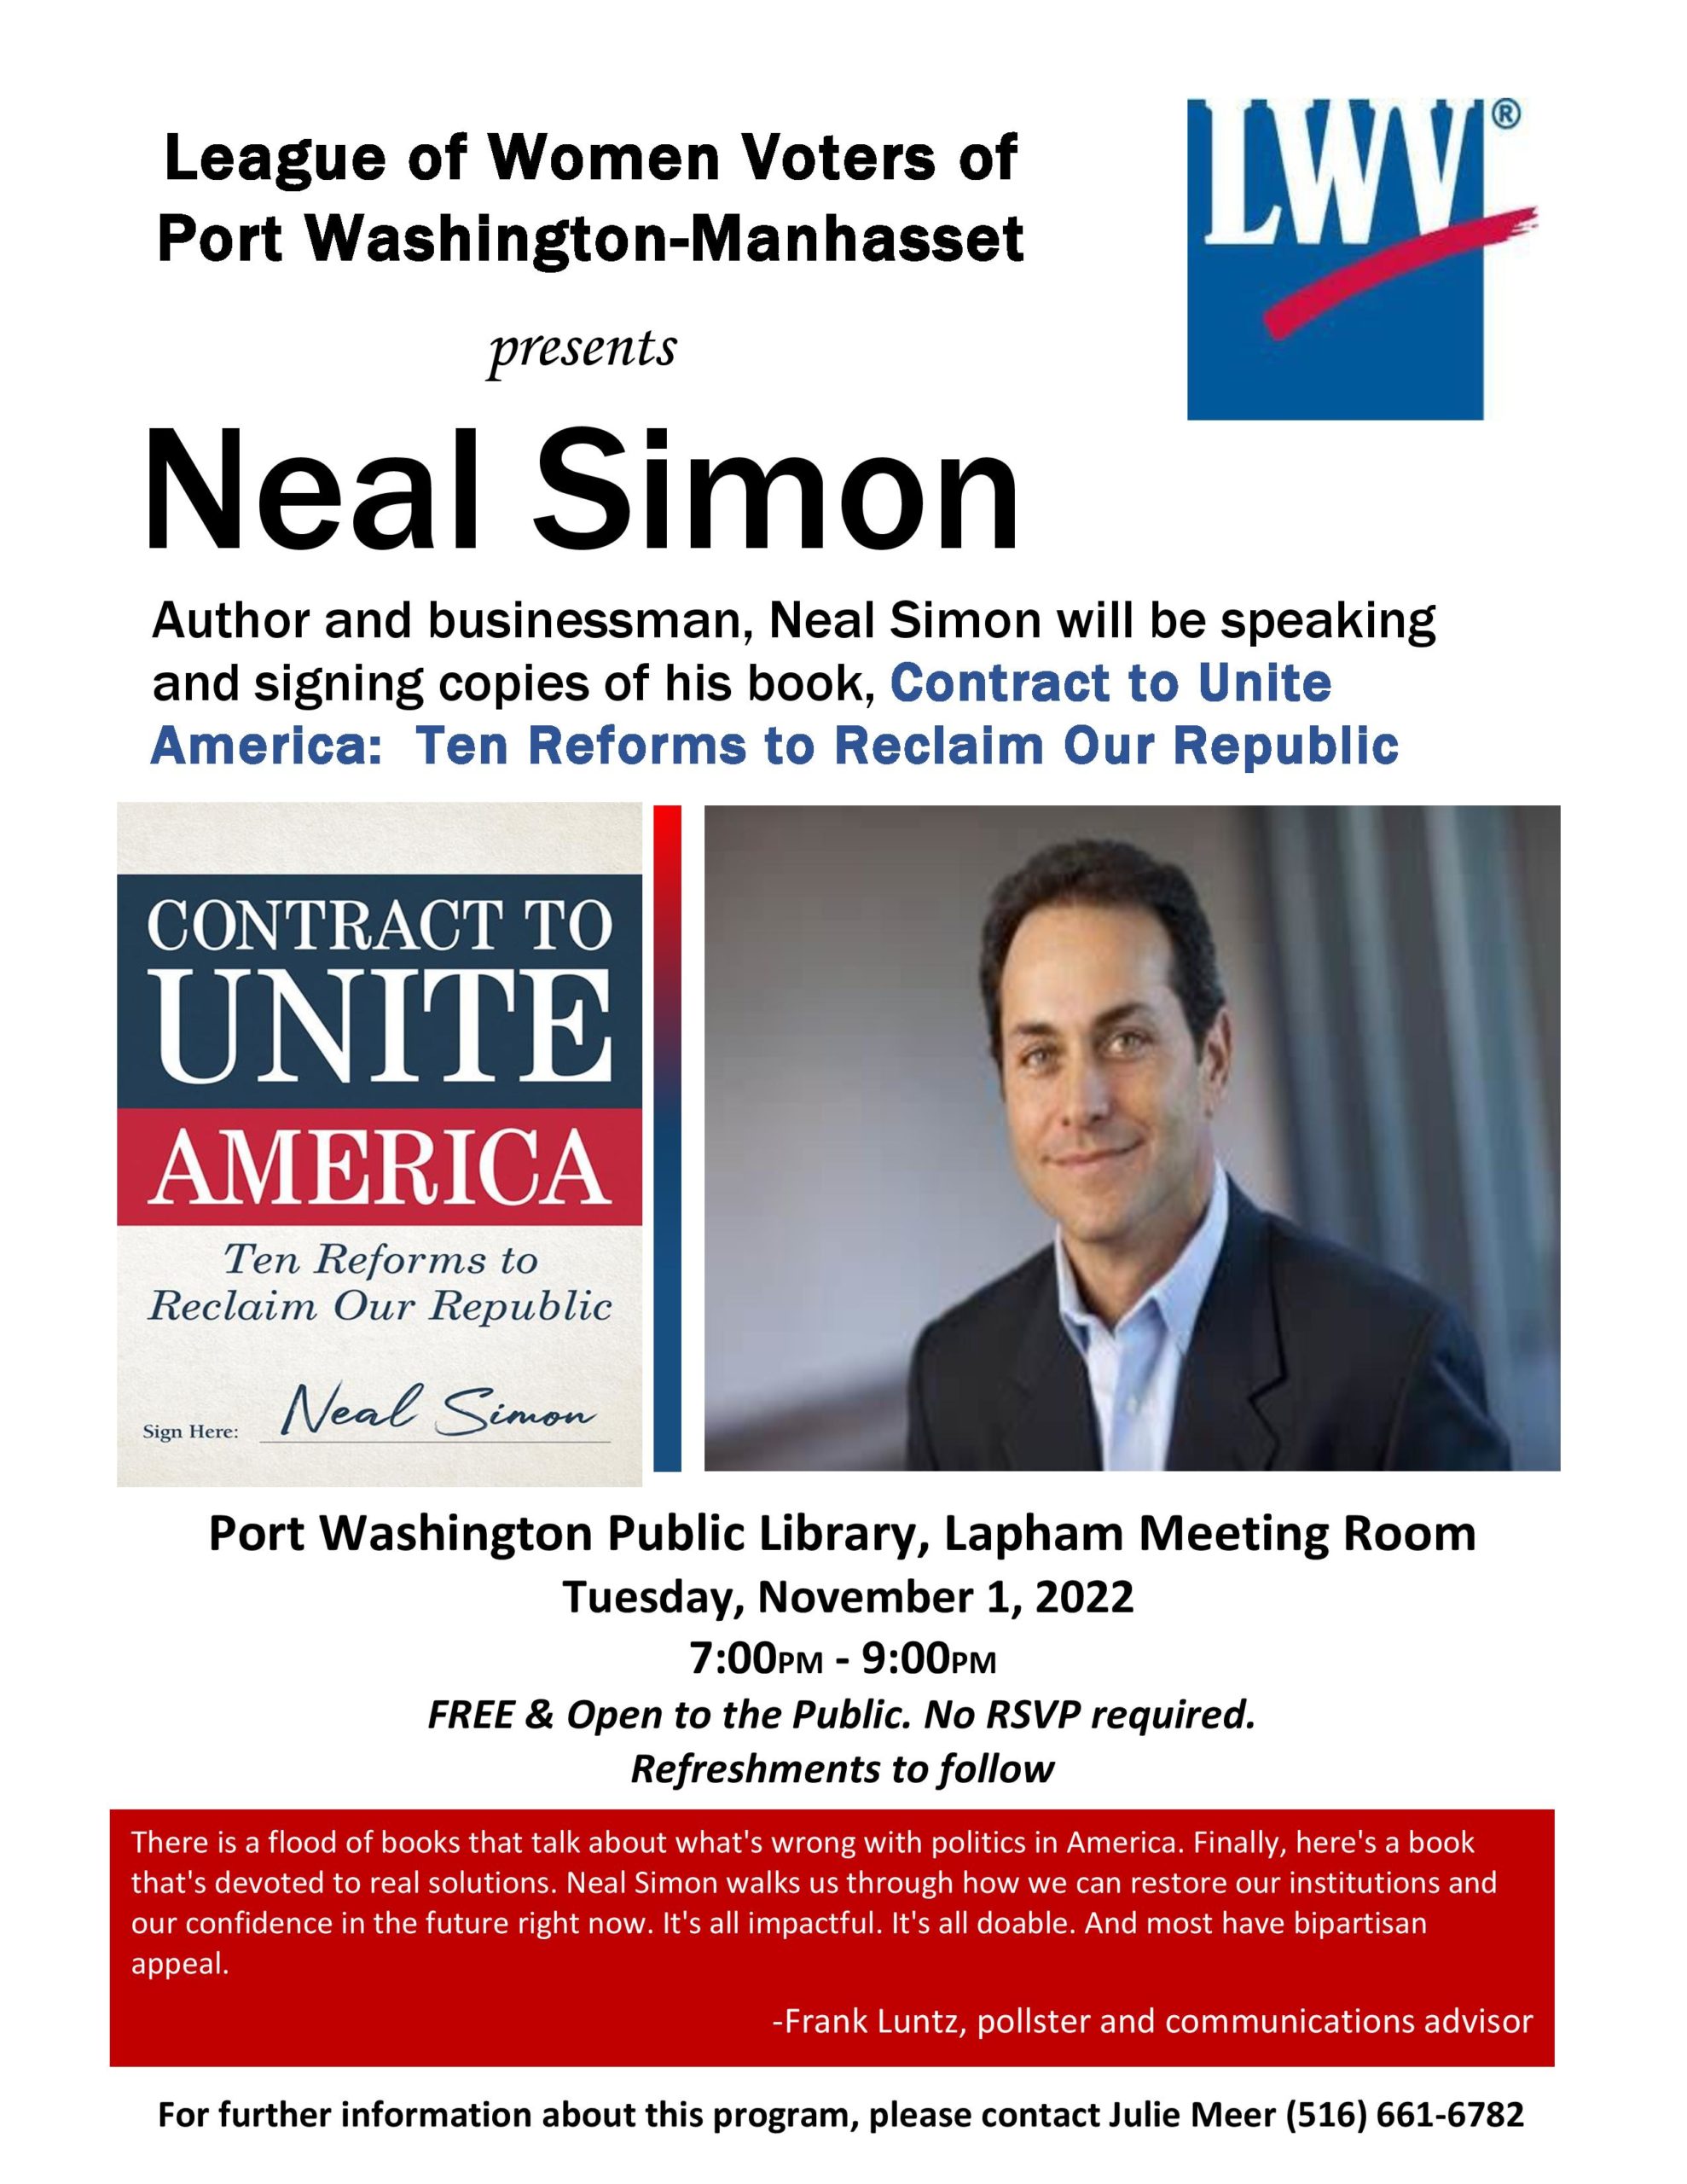 Neal Simon Book Signing Flyer